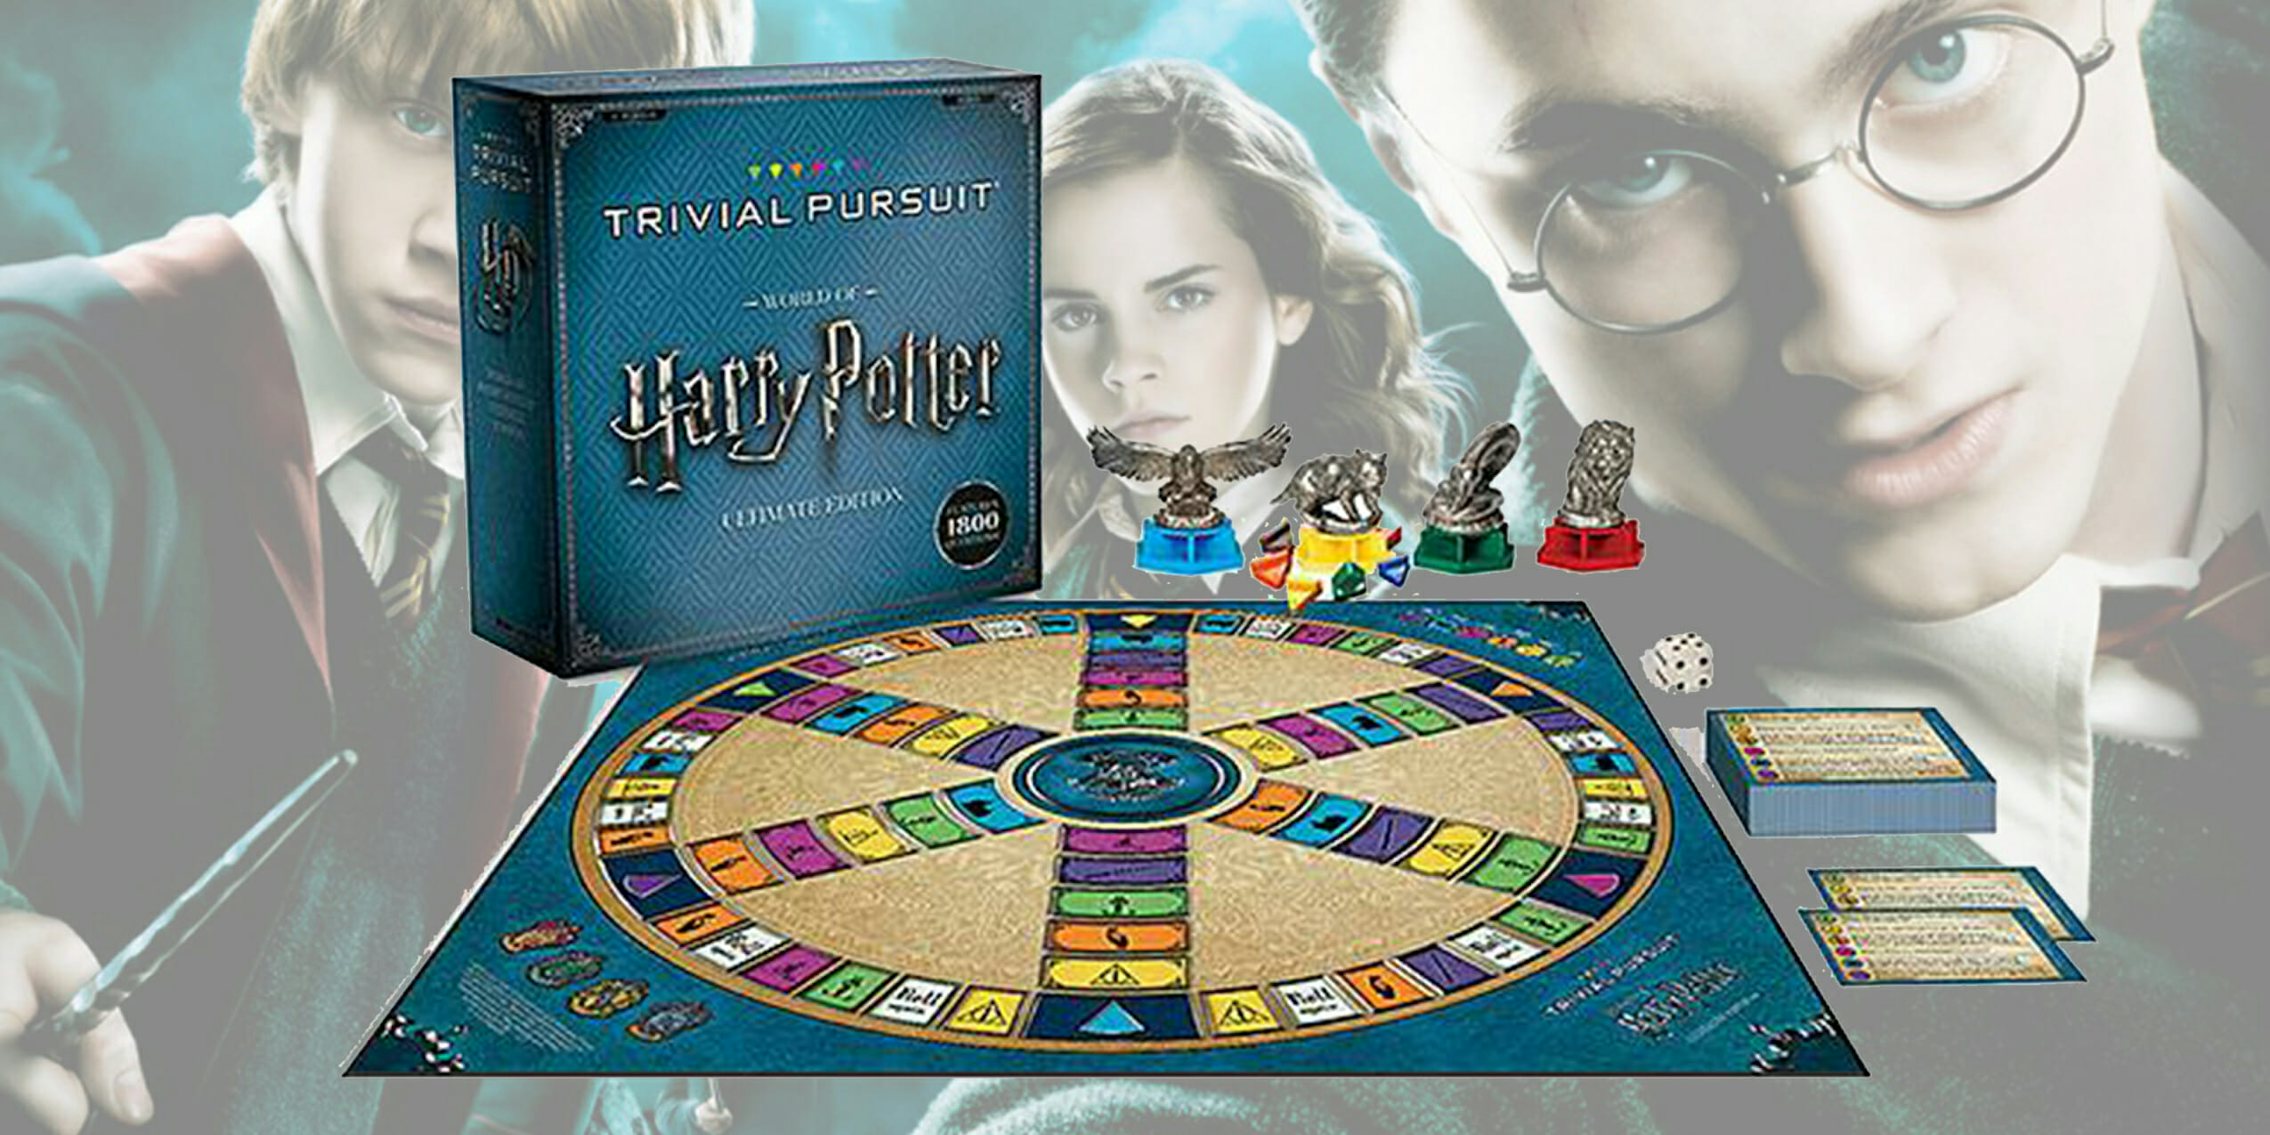 Harry Potter' Trivial Pursuit will test a Muggle's wizardly knowledge